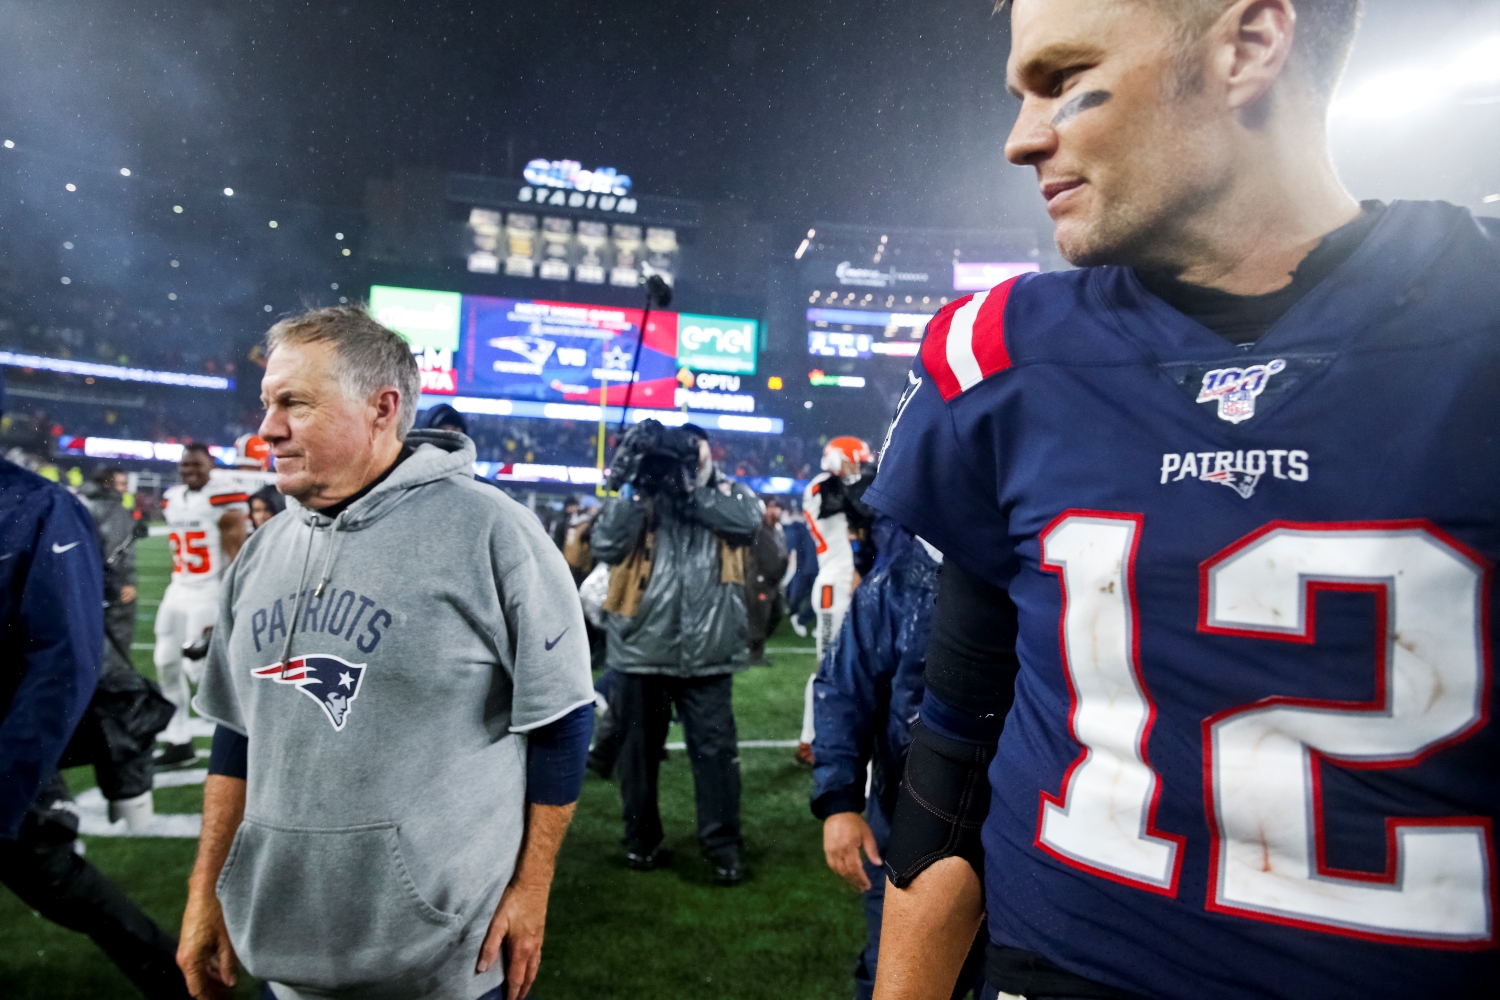 Bill Belichick and Tom Brady walk off the field after a 2019 game between the Patriots and the Browns.